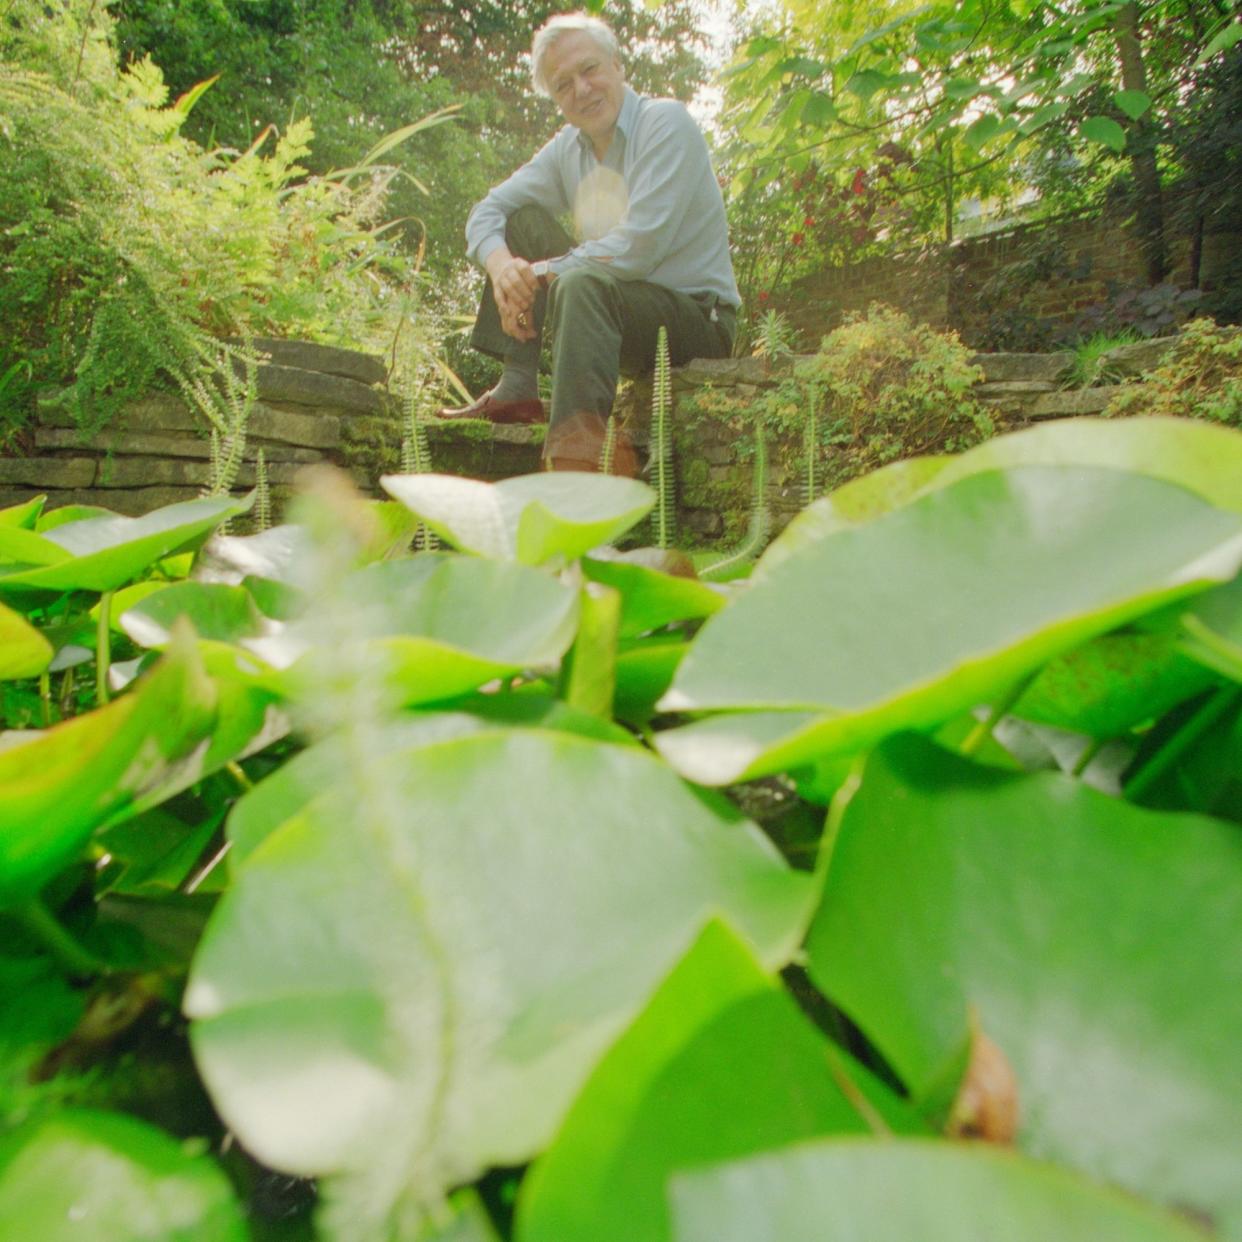  British naturalist and broadcaster Sir David Attenborough in the garden of his home 